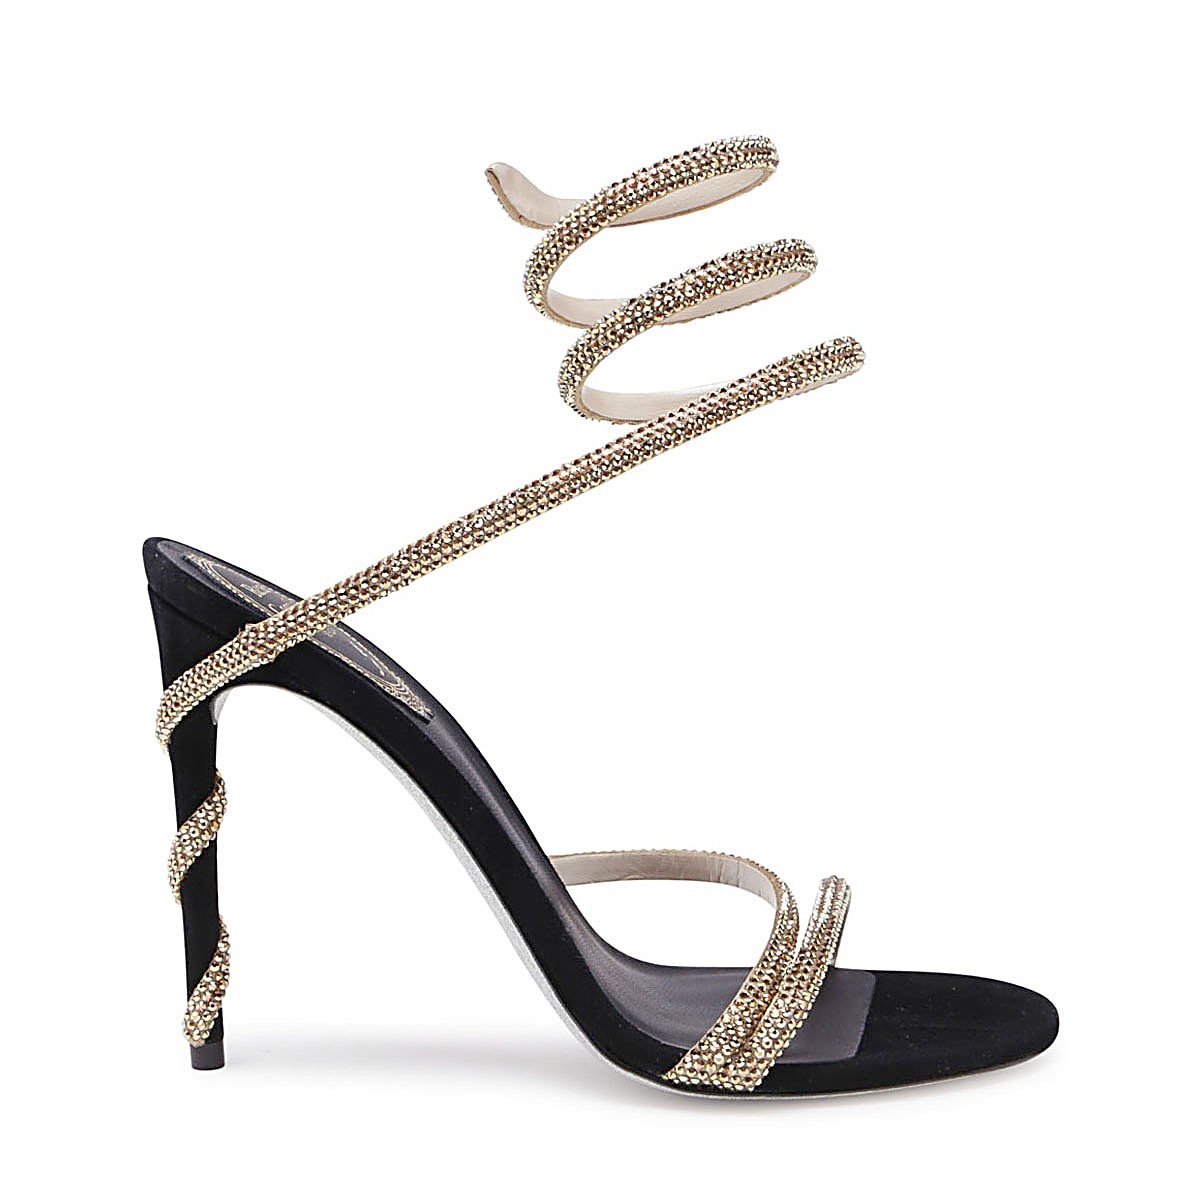 BLACK AND GOLD-TONE SUEDE MARGOT SANDALS